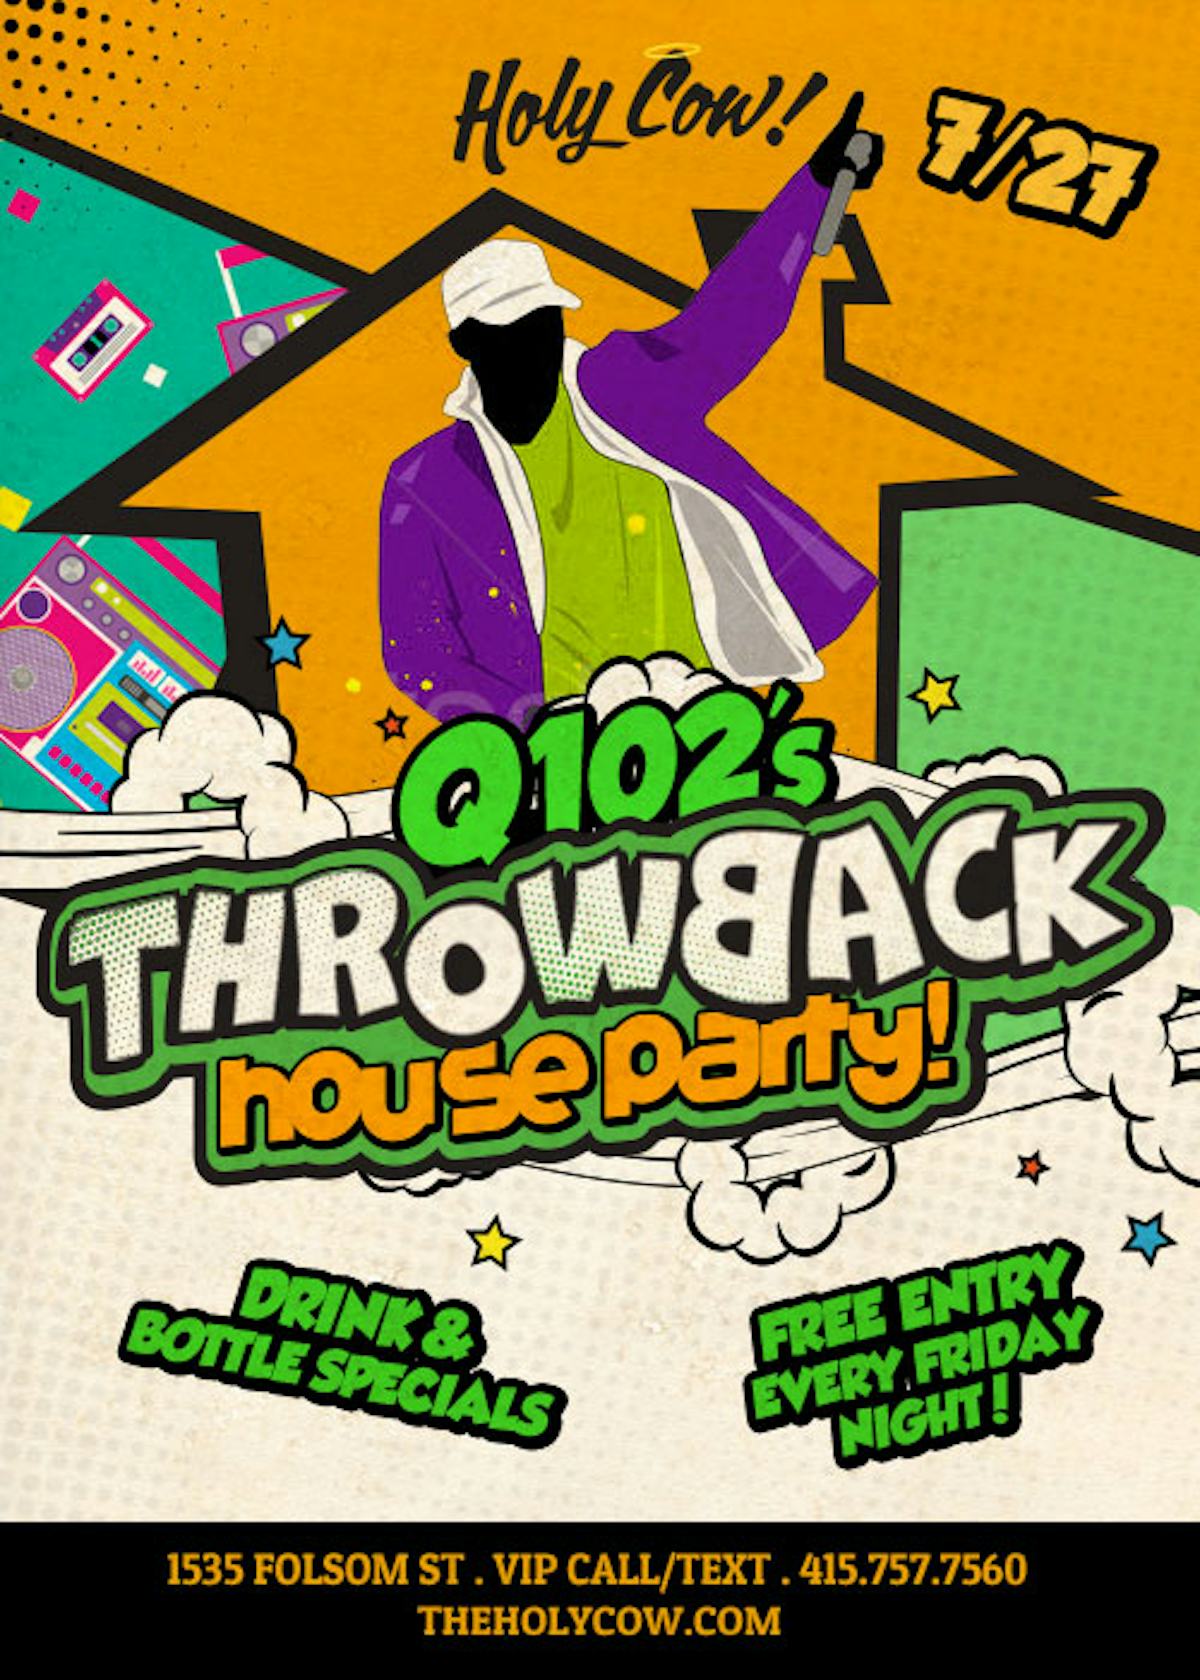 Tablelist Buy Tickets And Tables To Q102 Throwback House Party At Holy Cow